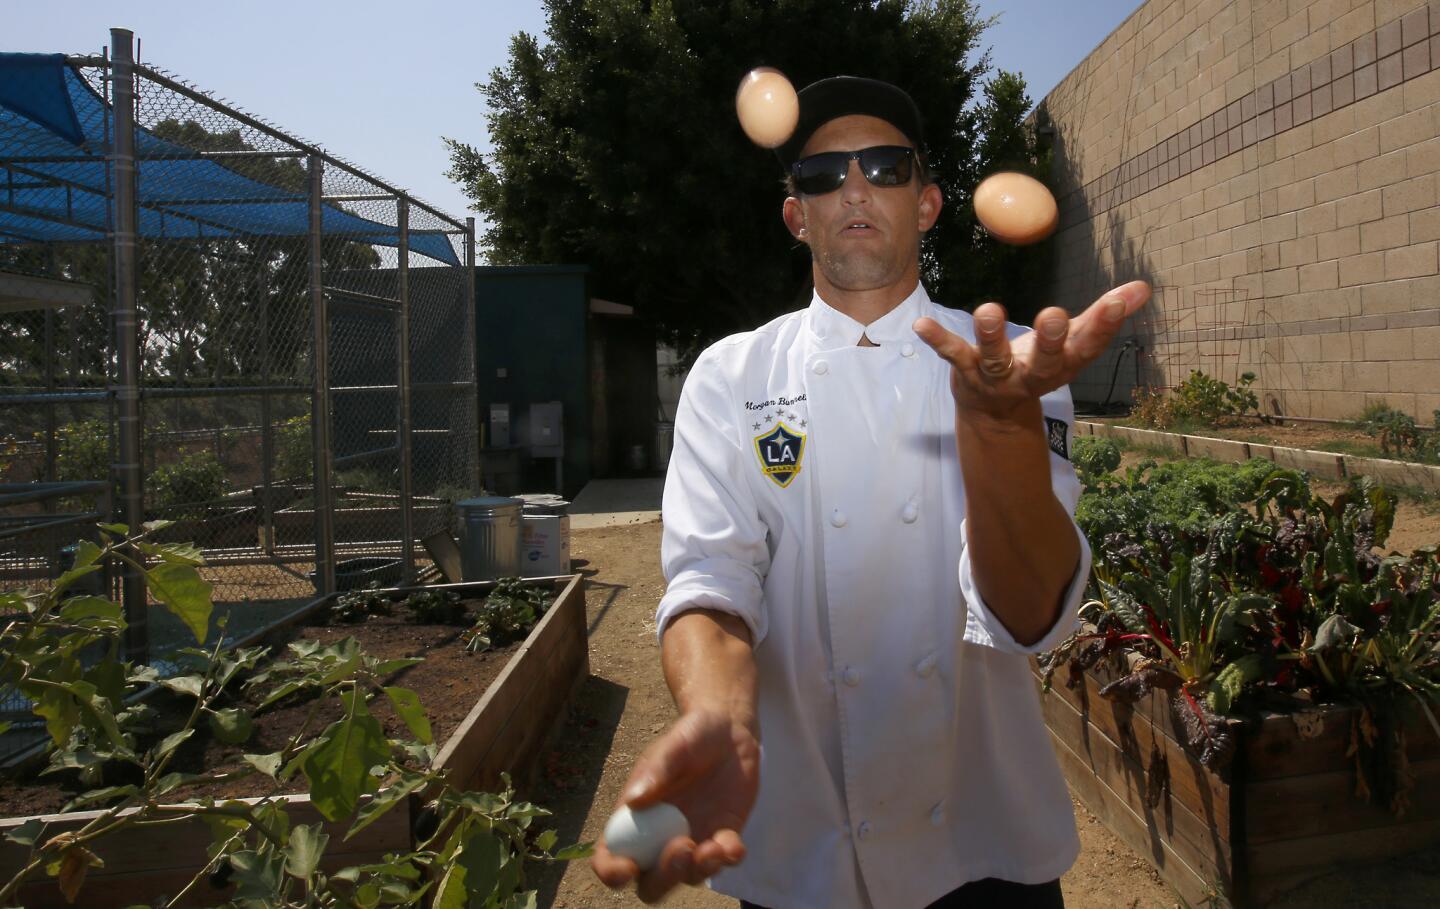 The Galaxy, L.A.'s soccer team, grows its own vegetables